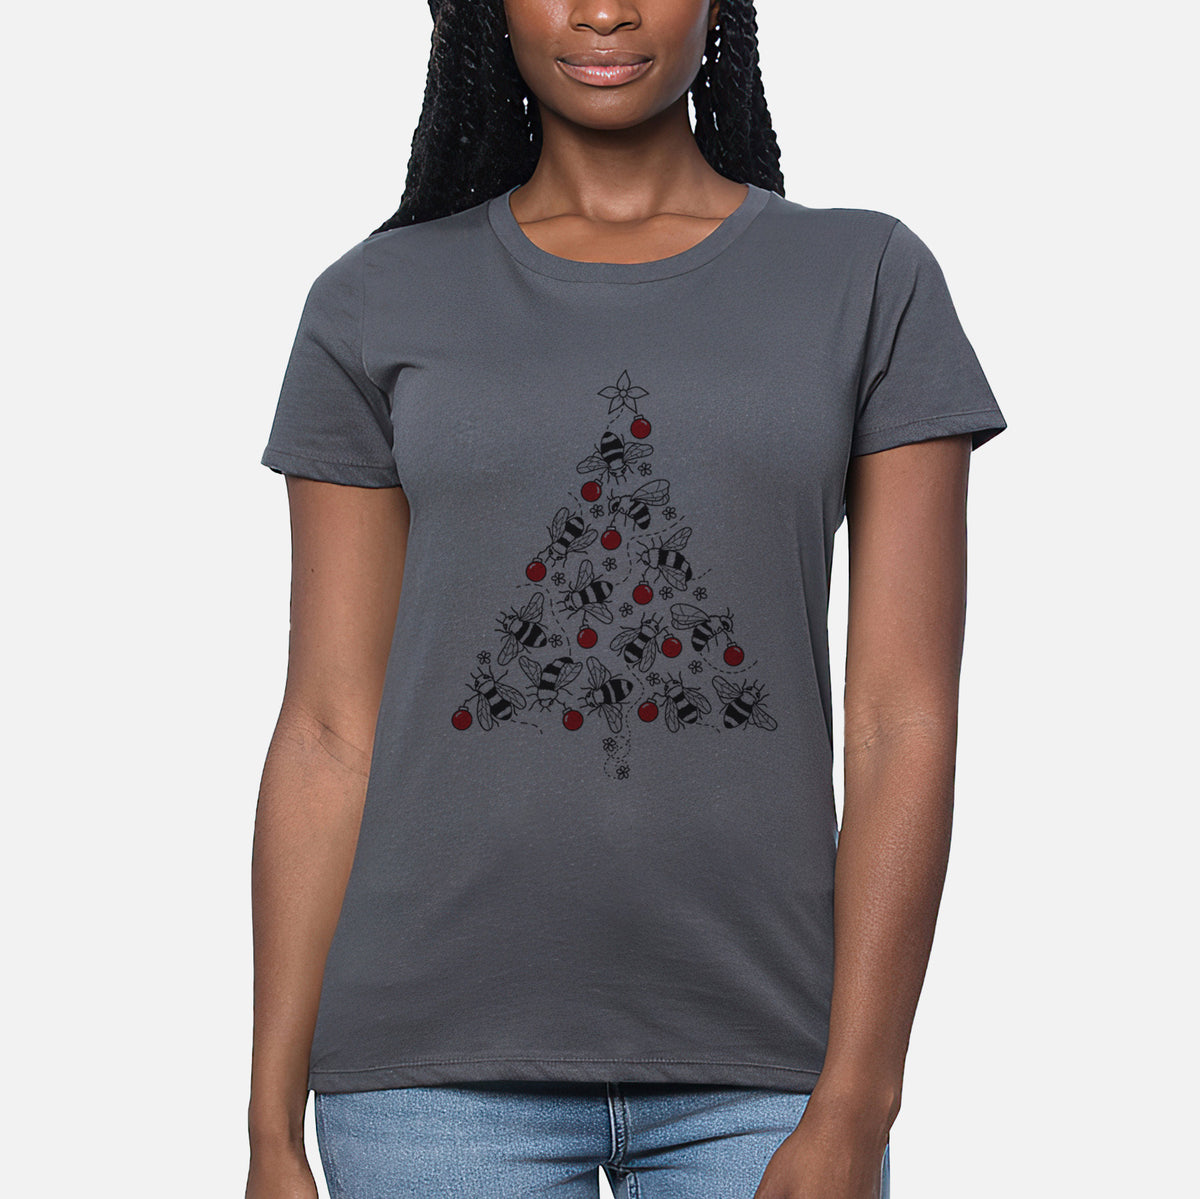 Christmas Tree of Bees - Women&#39;s Crewneck - Made in USA - 100% Organic Cotton